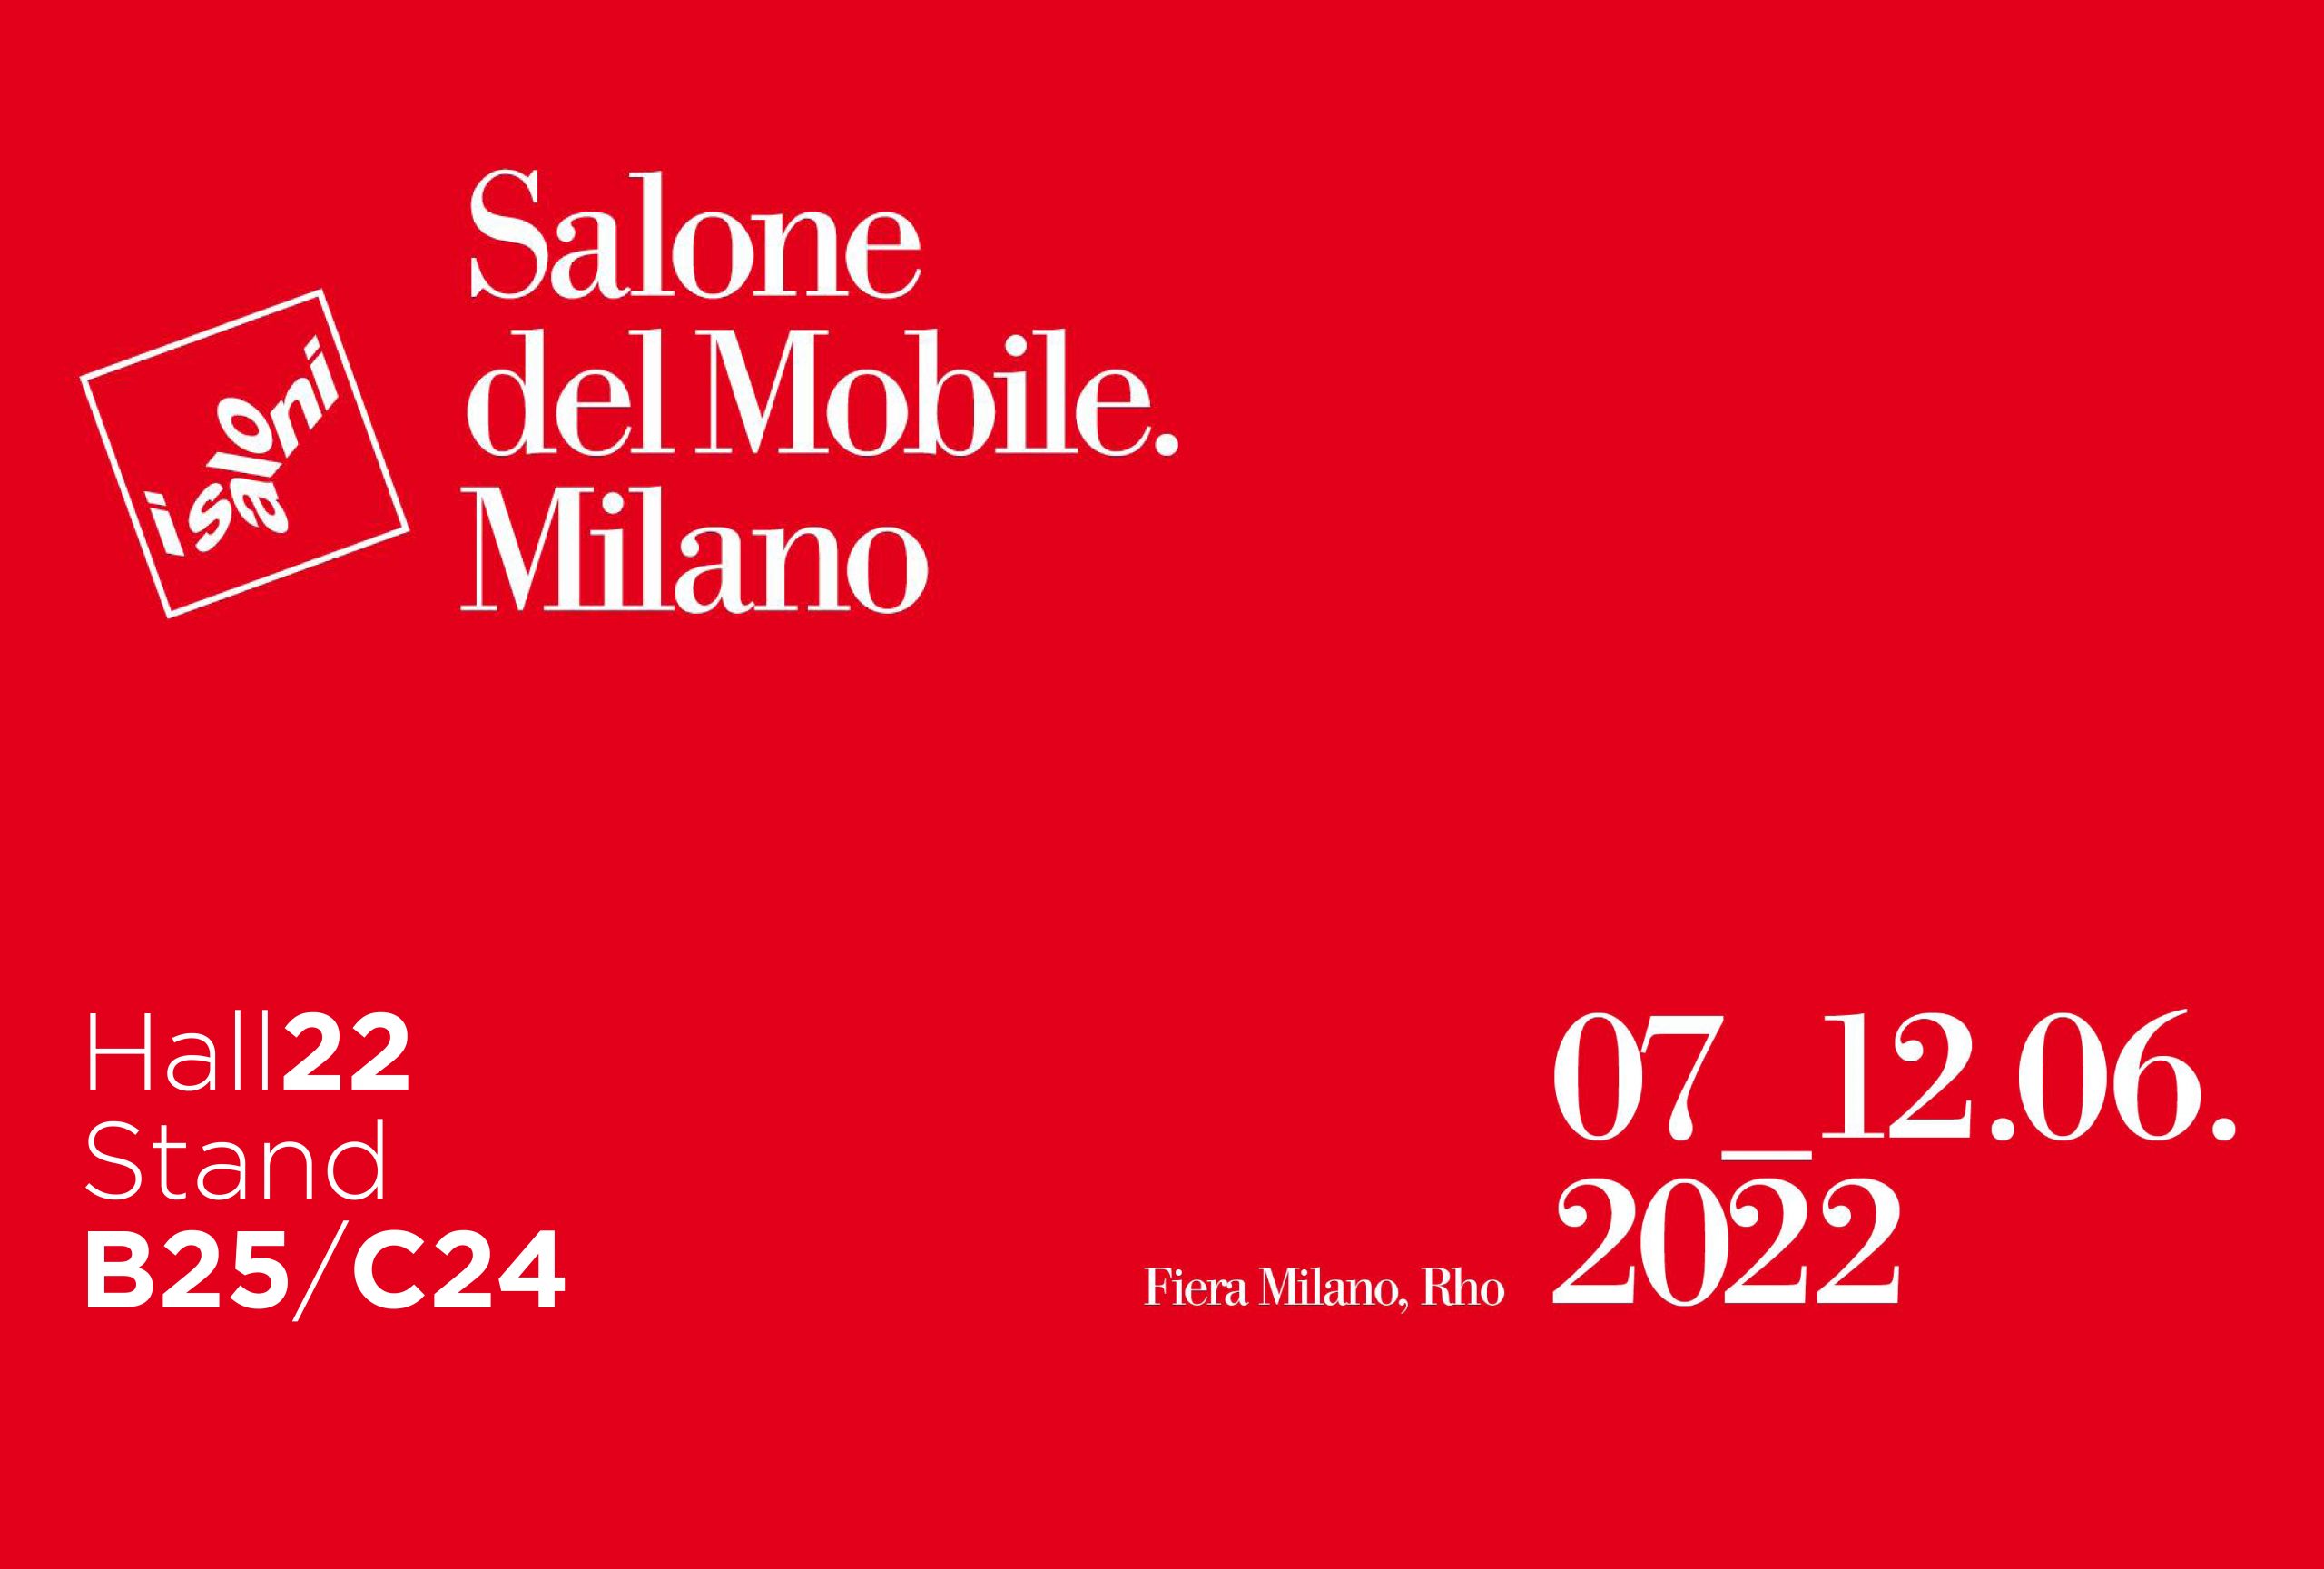 https://www.arbiarredobagno.fr/wp-content/uploads/2022/03/Salone-homepage-scaled.jpg